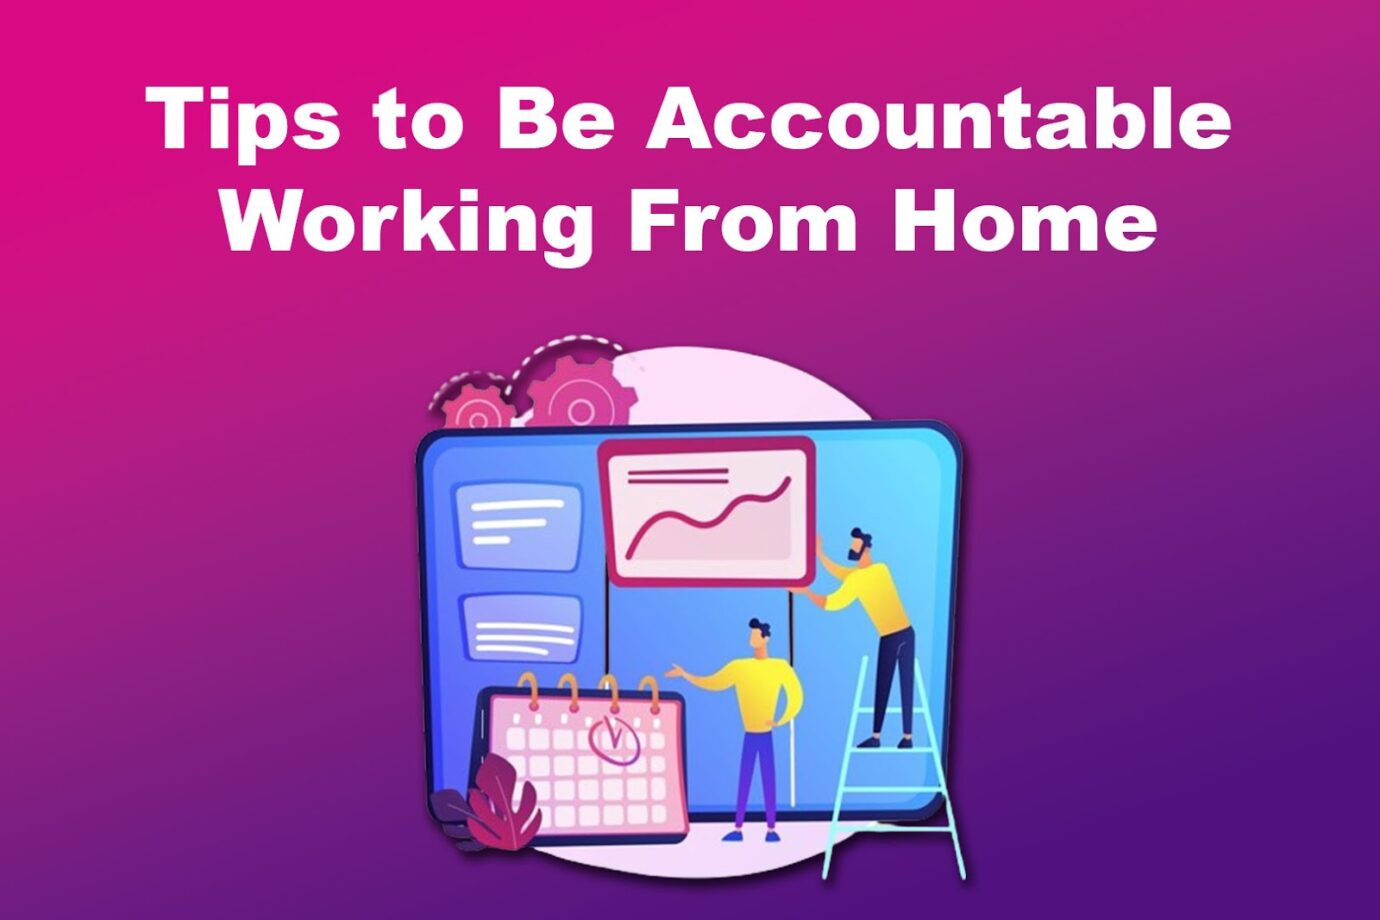 How to Be Accountable Working From Home